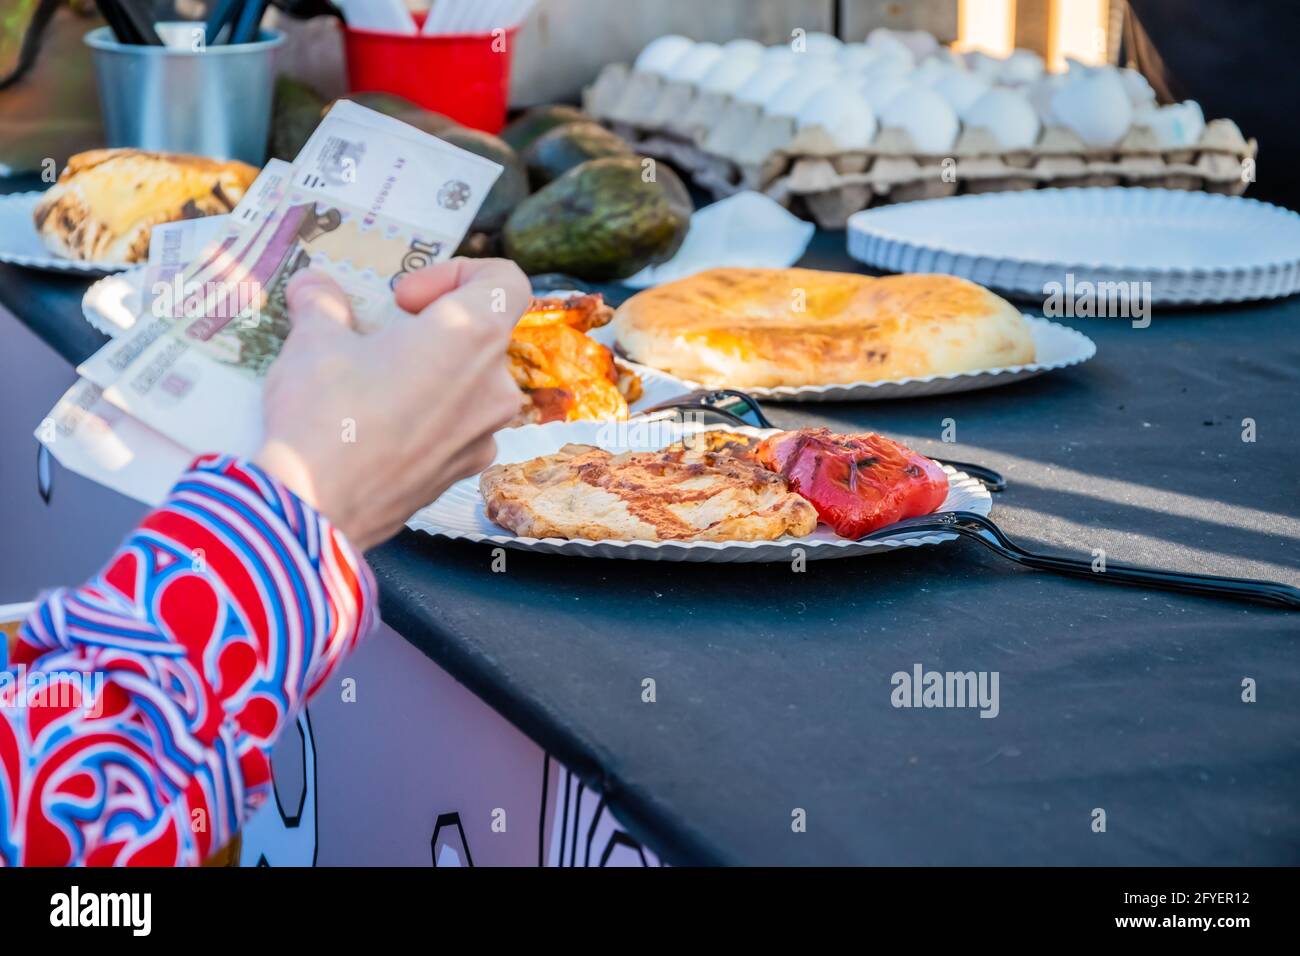 Close-up of a woman's hand with a paper currency, a customer makes an order at the counter of an open-air Mexican food restaurant. Food festival in th Stock Photo